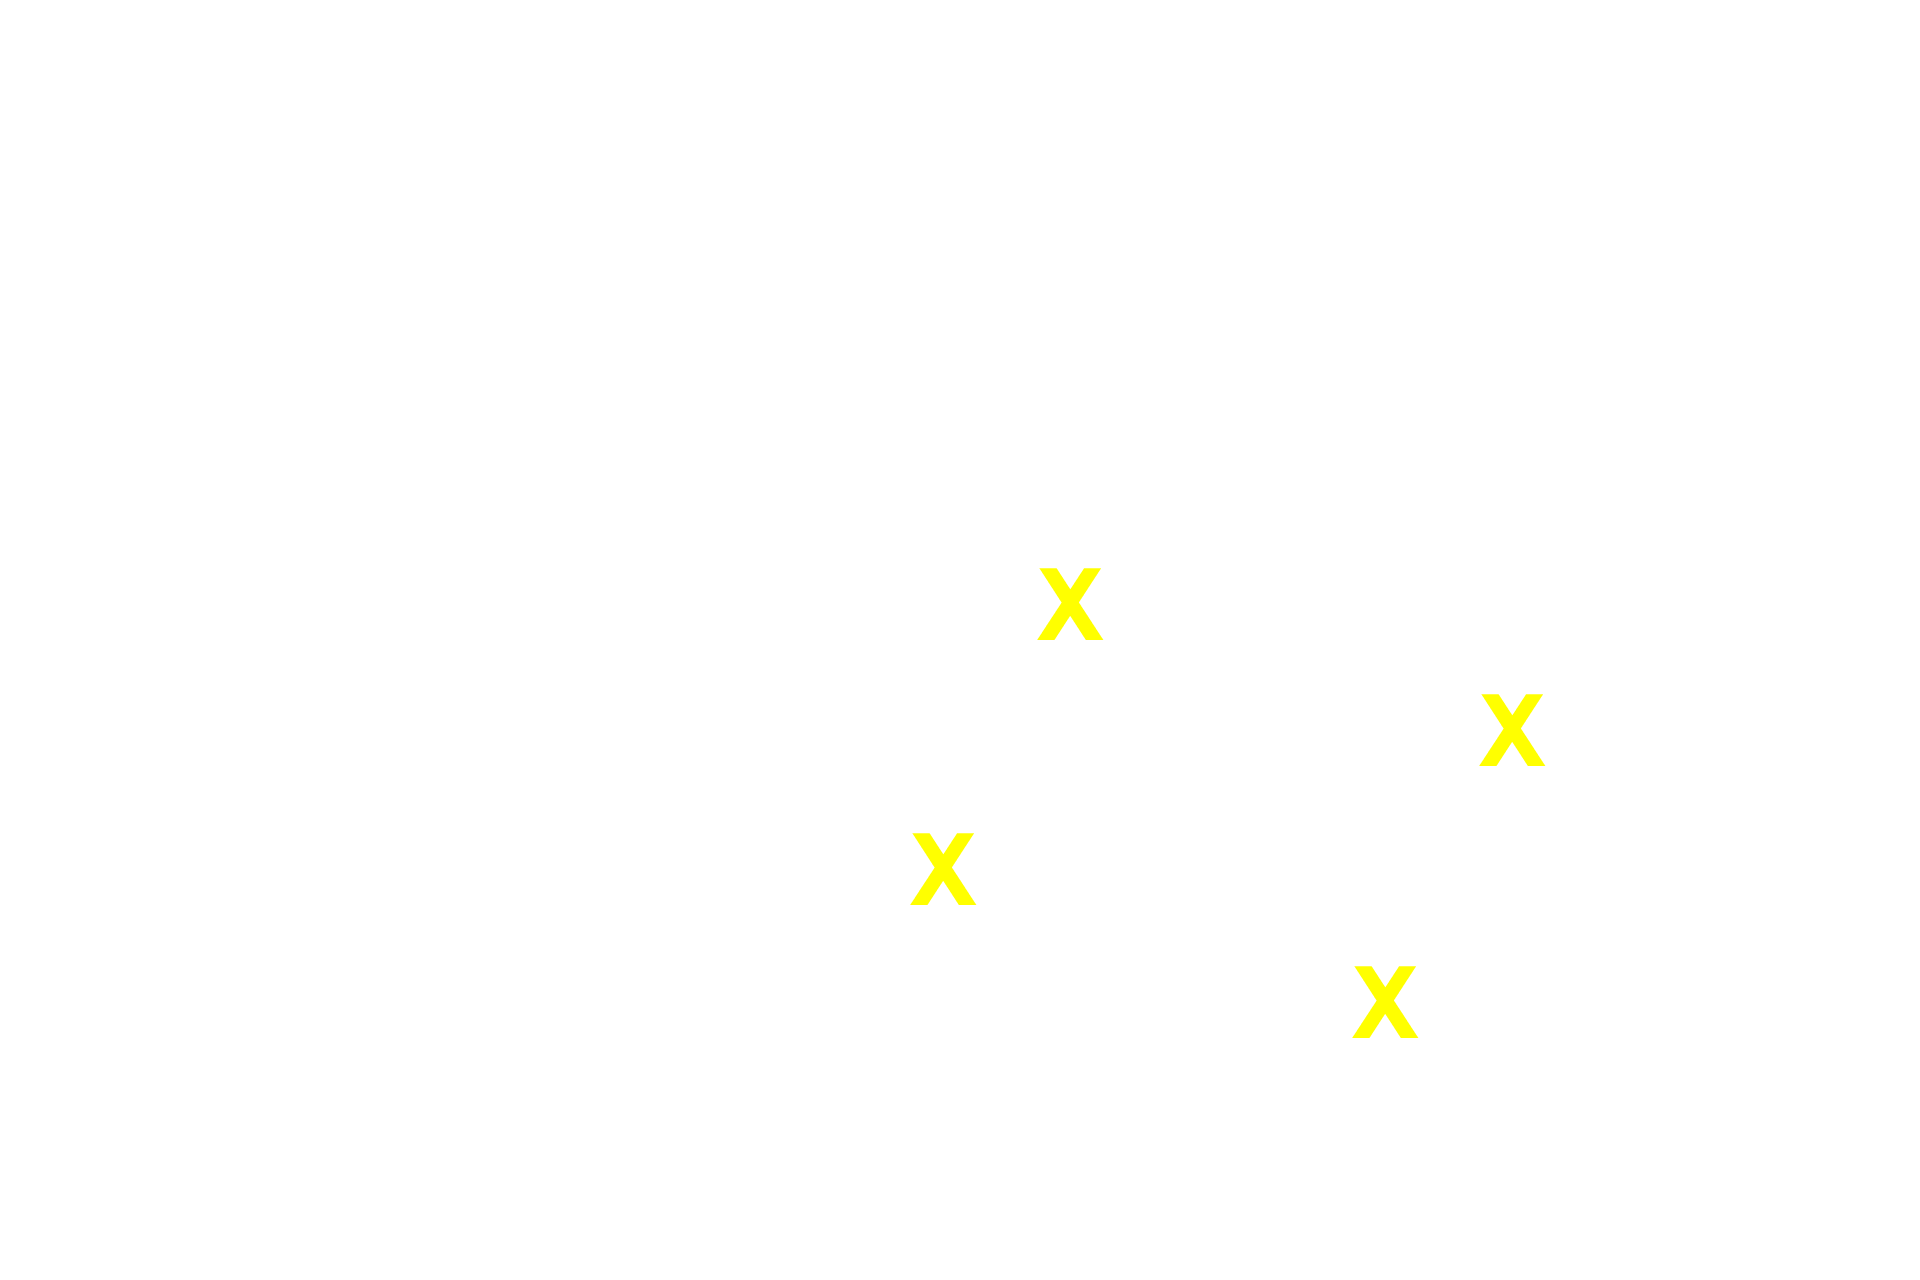 Periarterial lymphoid sheath (PALS) <p>The central arteriole and its relationship to the PALS is seen at higher magnification (area indicated by the yellow frame in the inset).  For most of its course, the central arteriole is surrounded by PALS.  Frequently, lymphoid nodules, B-dependent areas that form part of white pulp, develop within the PALS, causing the central arteriole to be eccentrically located.  A germinal center is just beginning to form.  200x</p>
